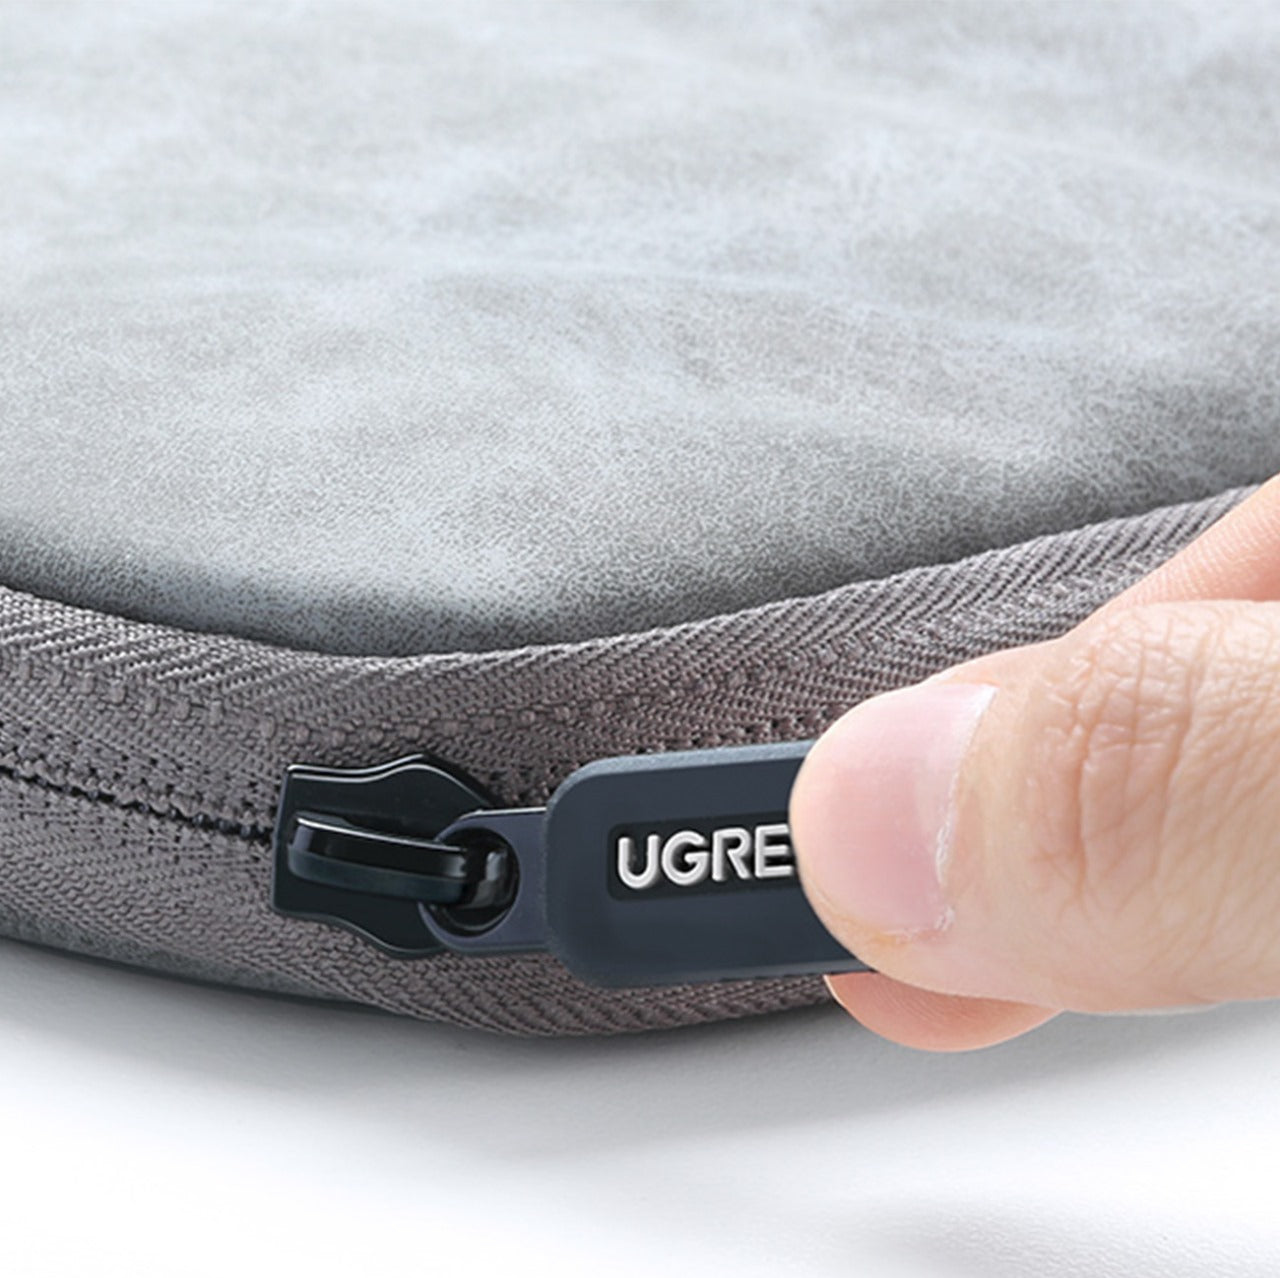 UGREEN Sleeve Case Storage Bag 13 Inches (Gray) 60985